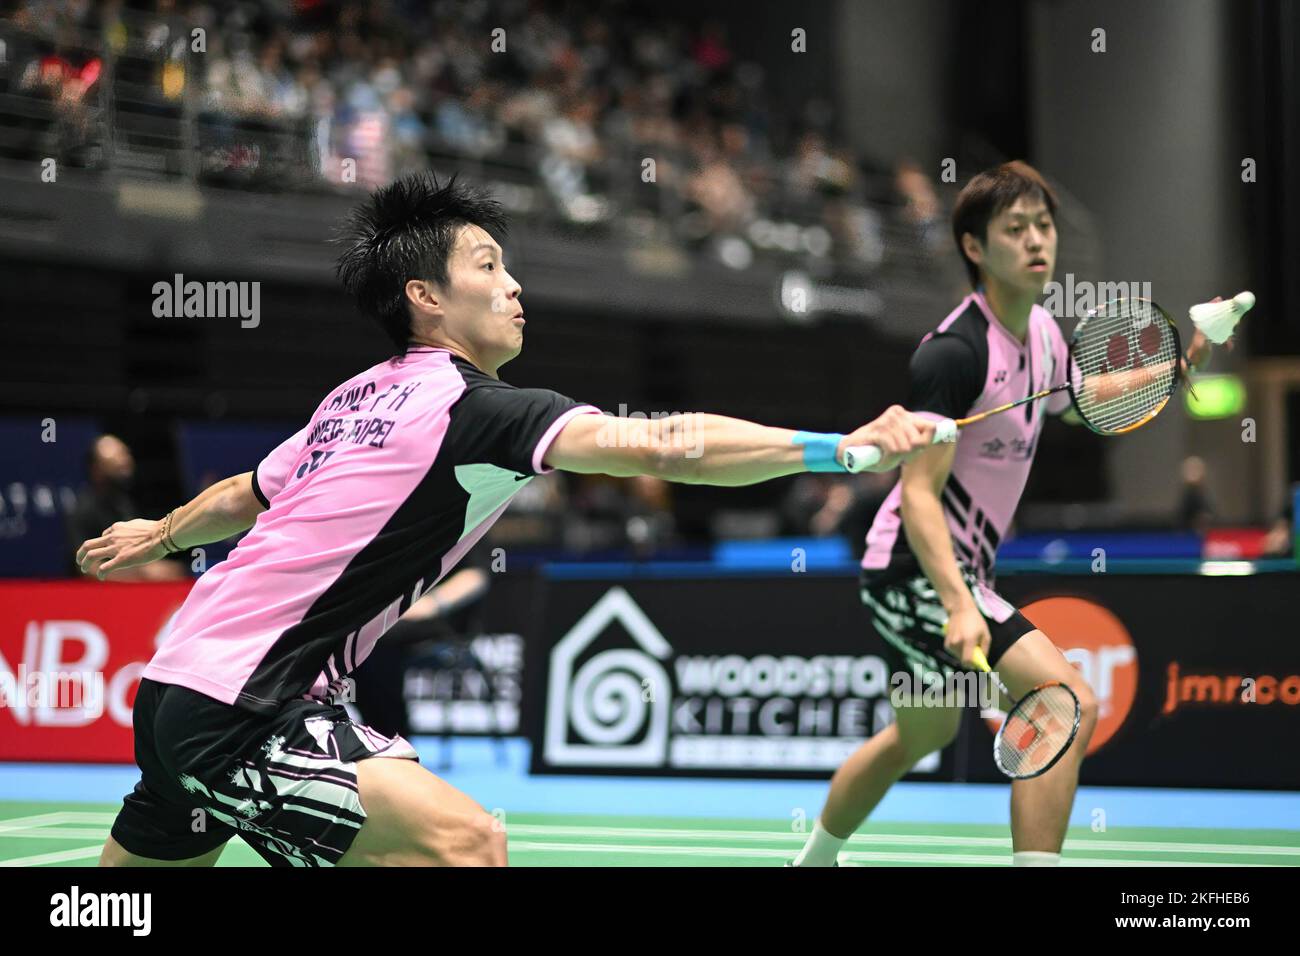 Sydney, Australia. 18th Nov, 2022. Yang Po-Hsuan and Lee Jhe-Huei of Chinese Taipei seen during the 2022 SATHIO GROUP Australian Badminton Open men's double quarter finals match against Fang-Chih Lee and Fang-Jen Lee of Chinese Taipei. Yang and Lee won the match 21-19, 14-21, 21-17. Credit: SOPA Images Limited/Alamy Live News Stock Photo